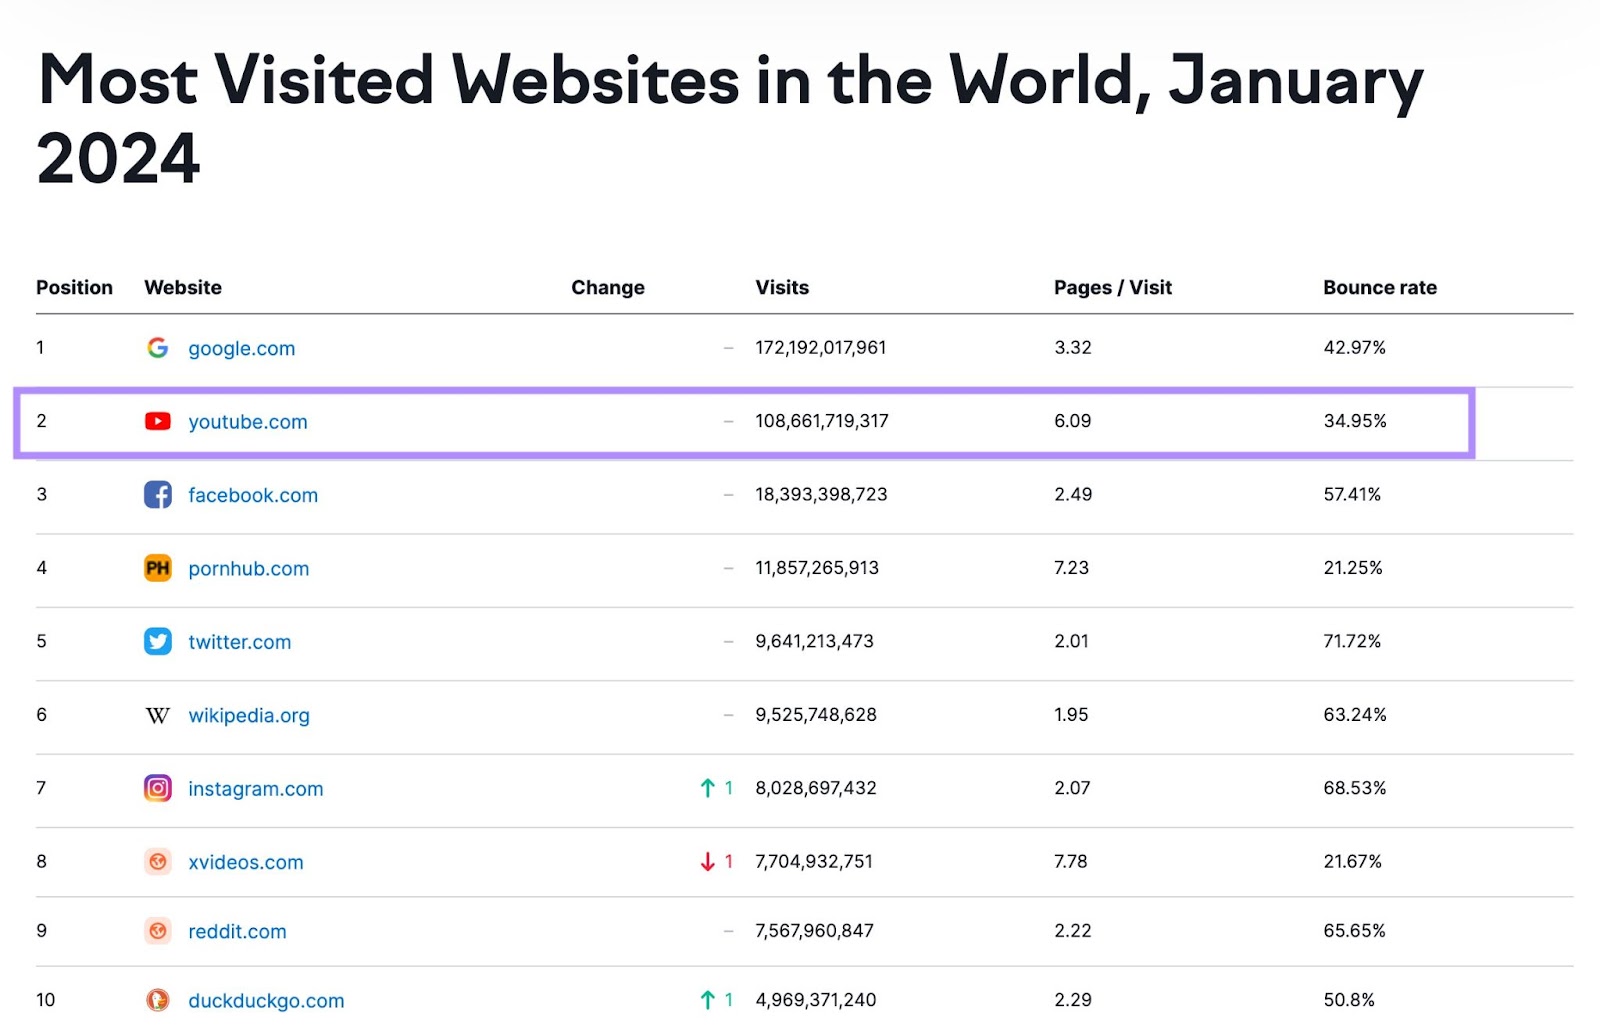 A list of most visited websites in the world in January 2024